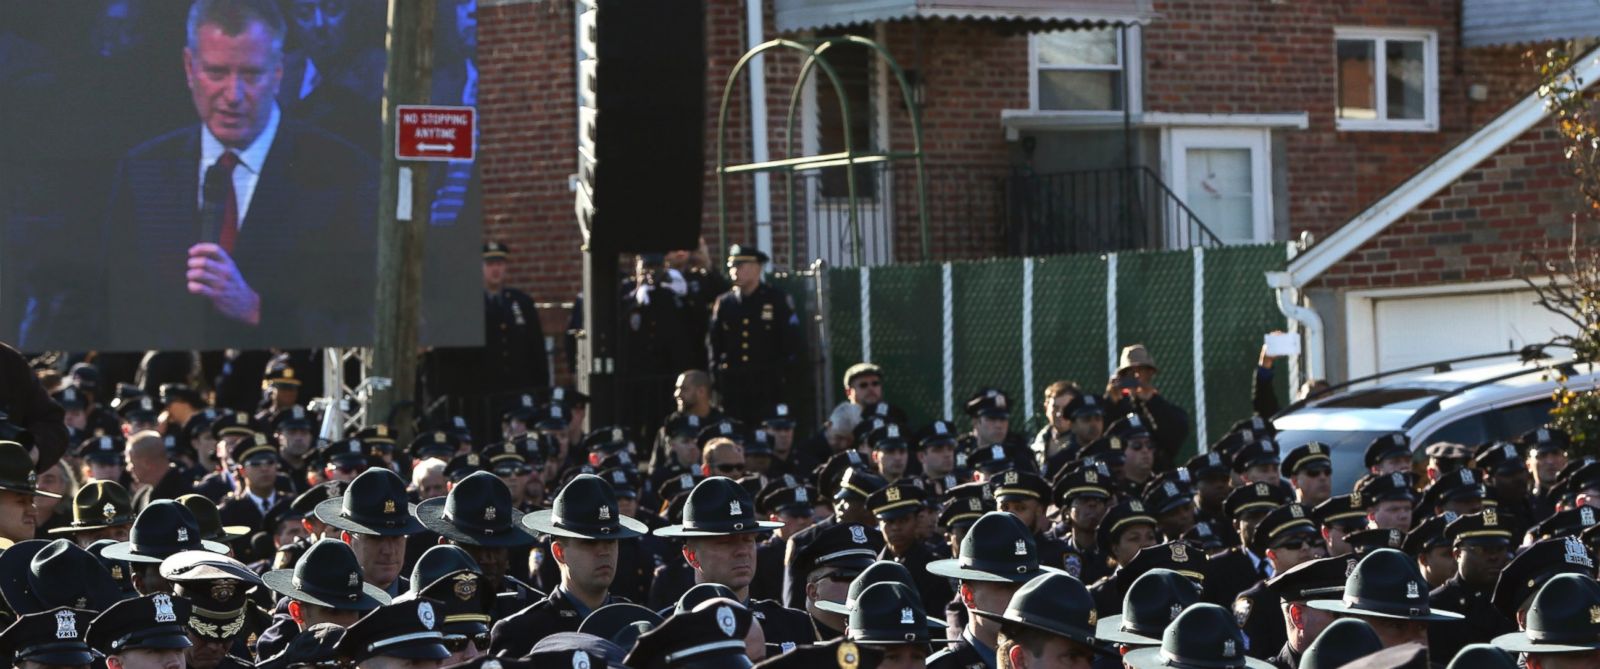 Hundreds Turn Their Back On De Blasio At Nypd Officers Funeral Abc News 2694